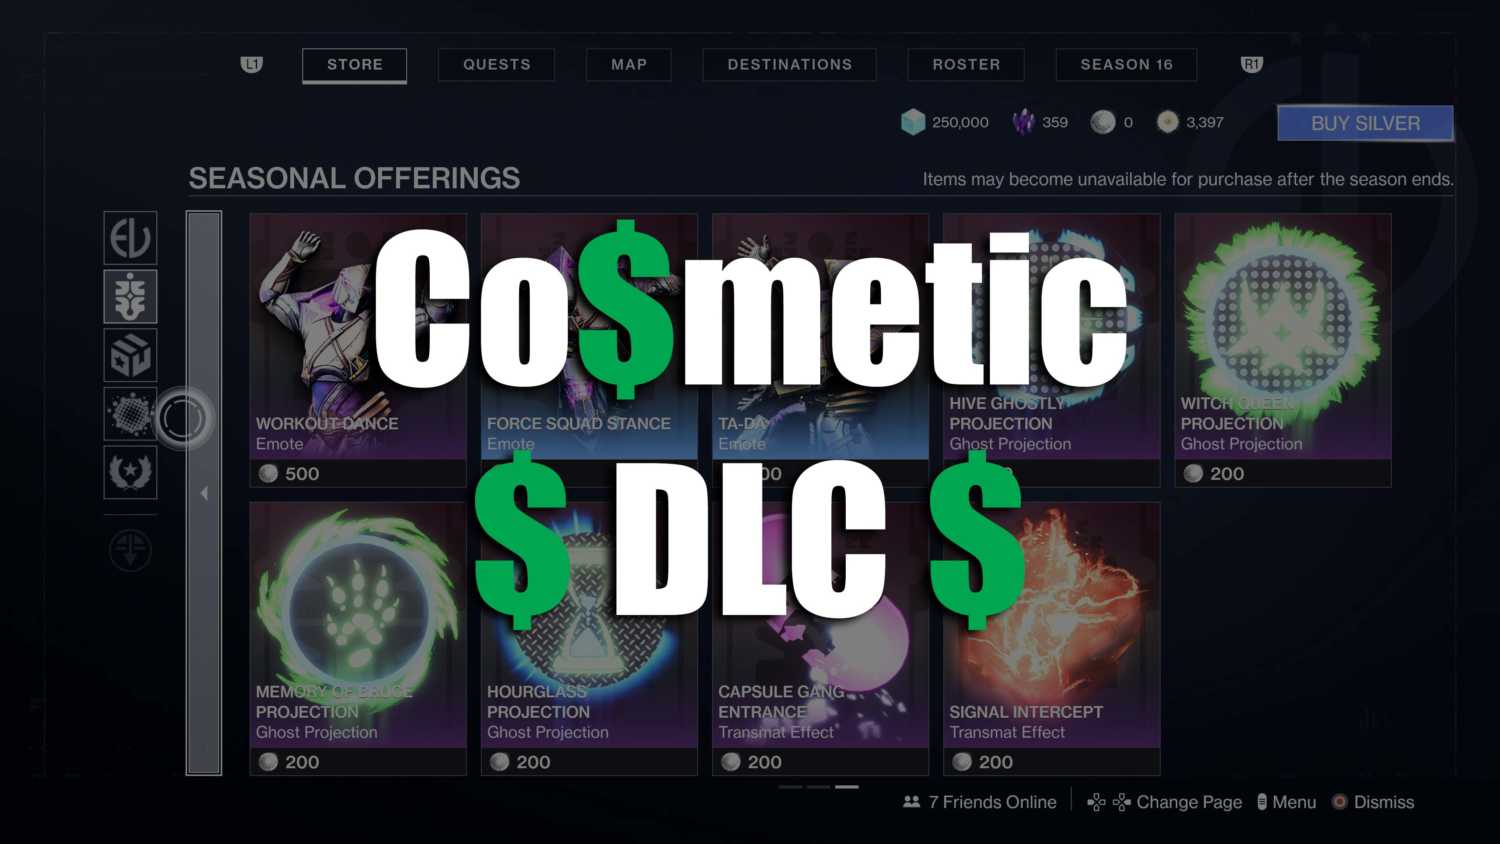 cosmetic DLC expensive